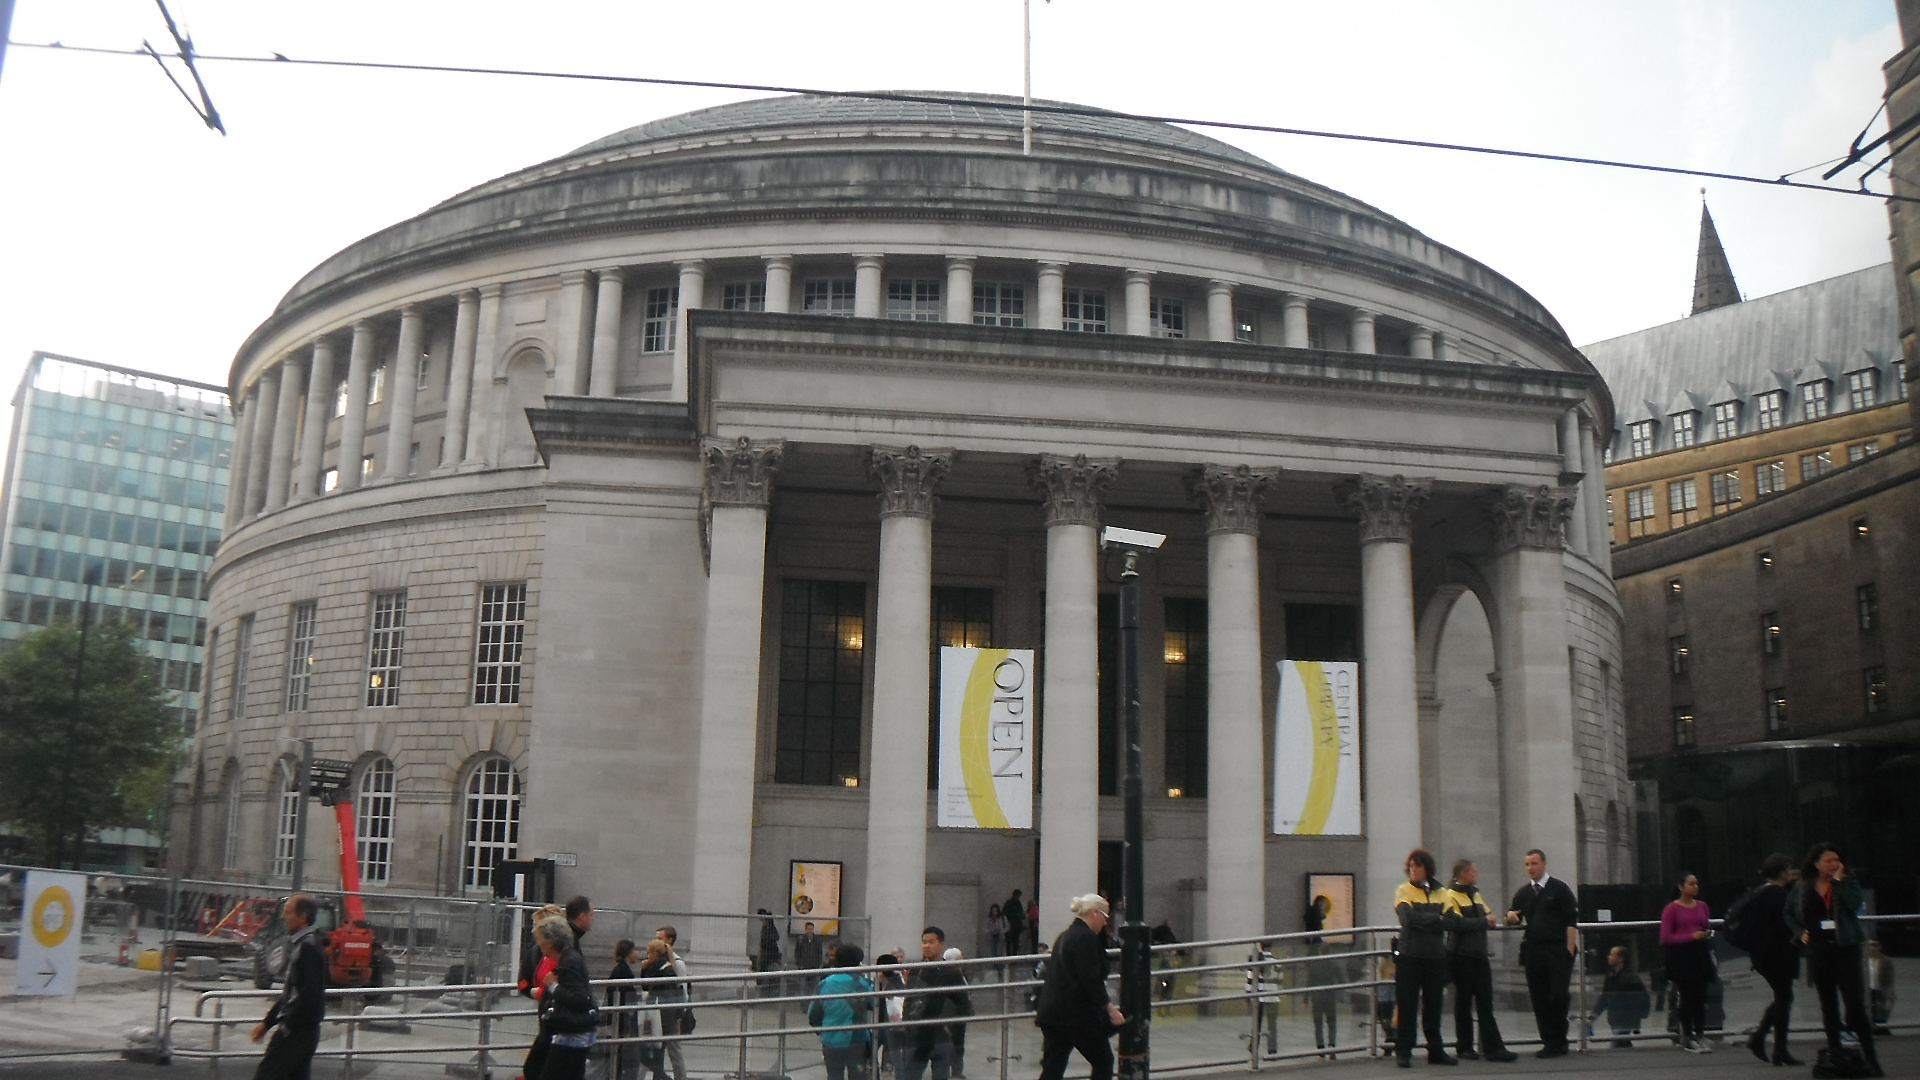 Photo taken by me – Manchester Central Library 